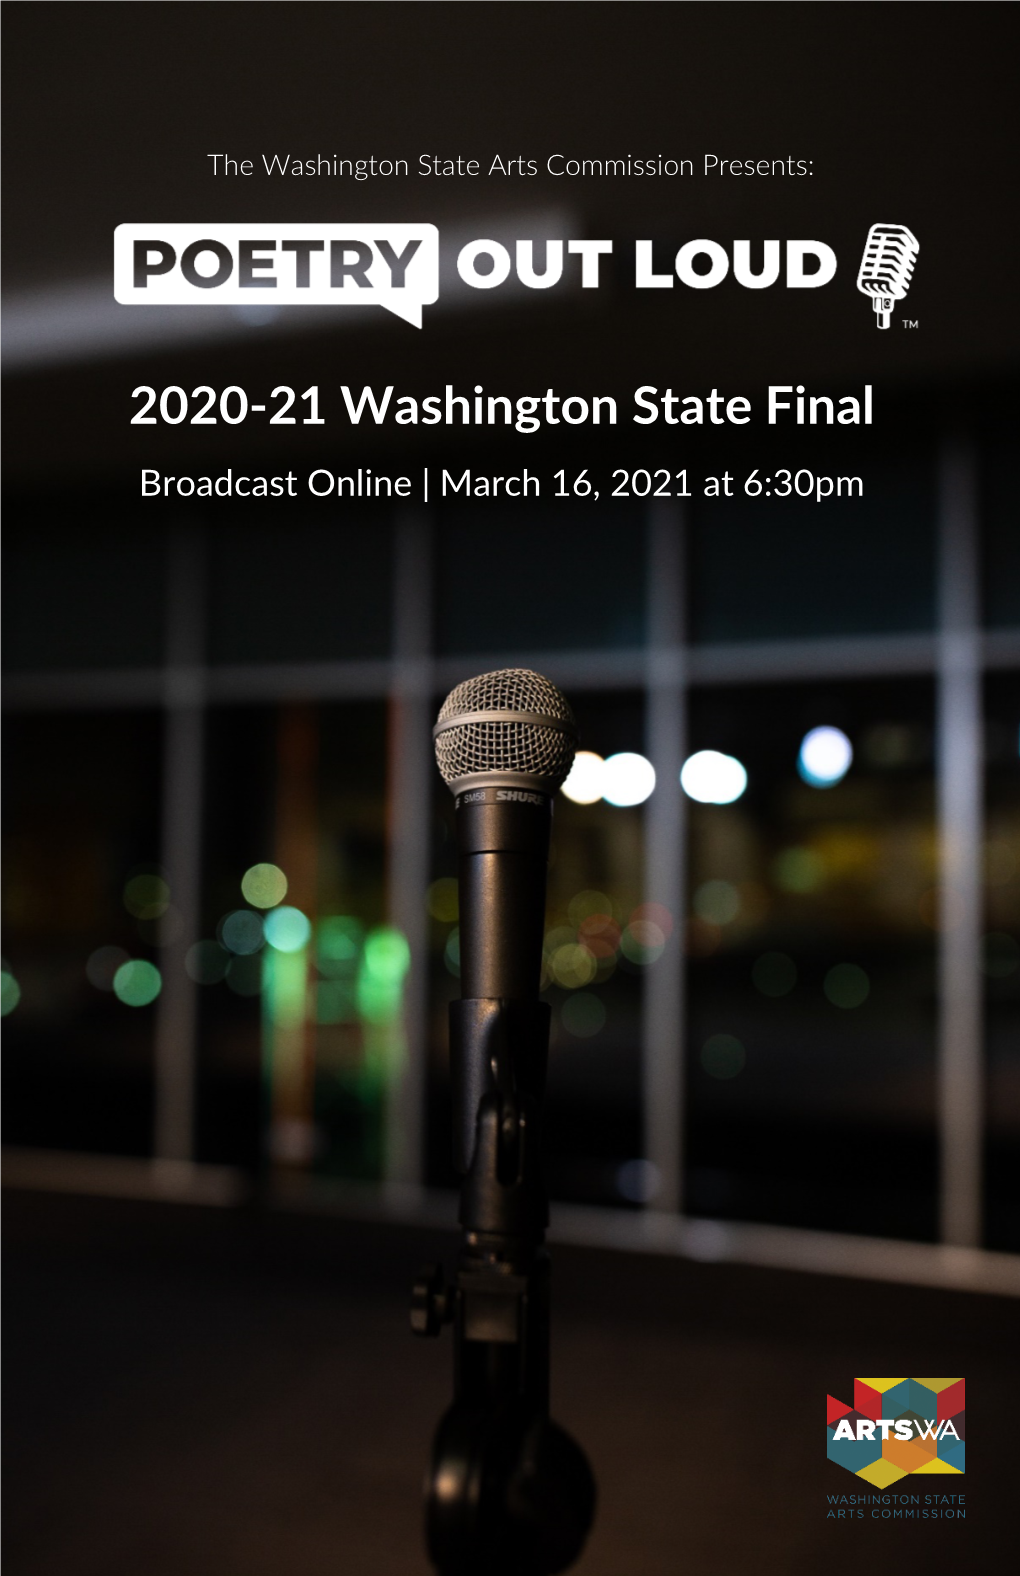 2020-21 Washington State Final Broadcast Online | March 16, 2021 at 6:30Pm